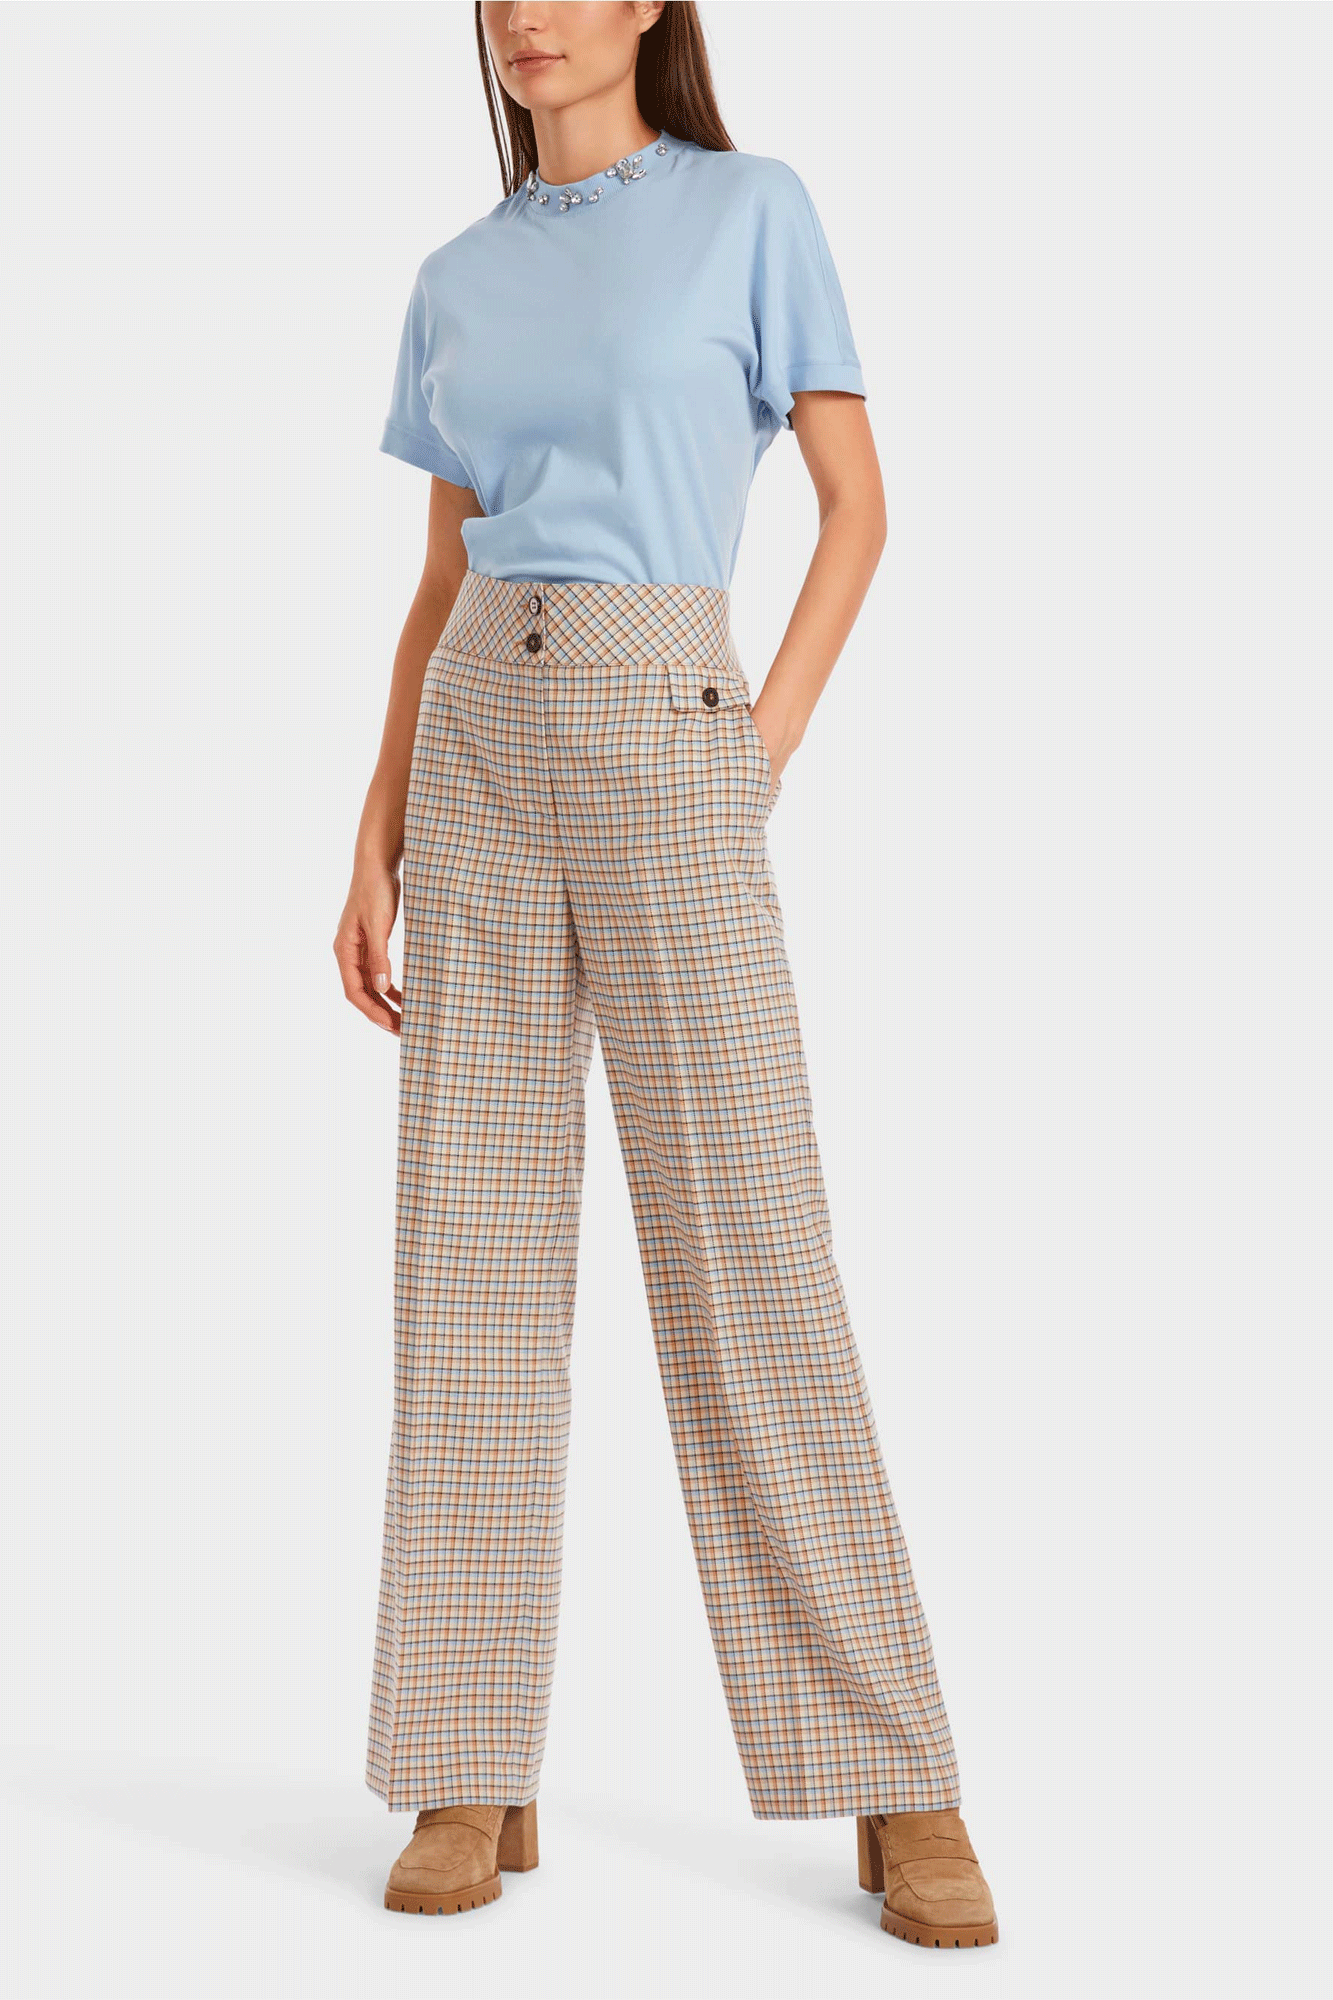 Plaid Pants from Marc Cain are a stylish addition to your wardrobe. Crafted from a wool and elastane blend, the high-waist pants feature a wide cut for a comfortable fit, alongside an elasticated waistband. 